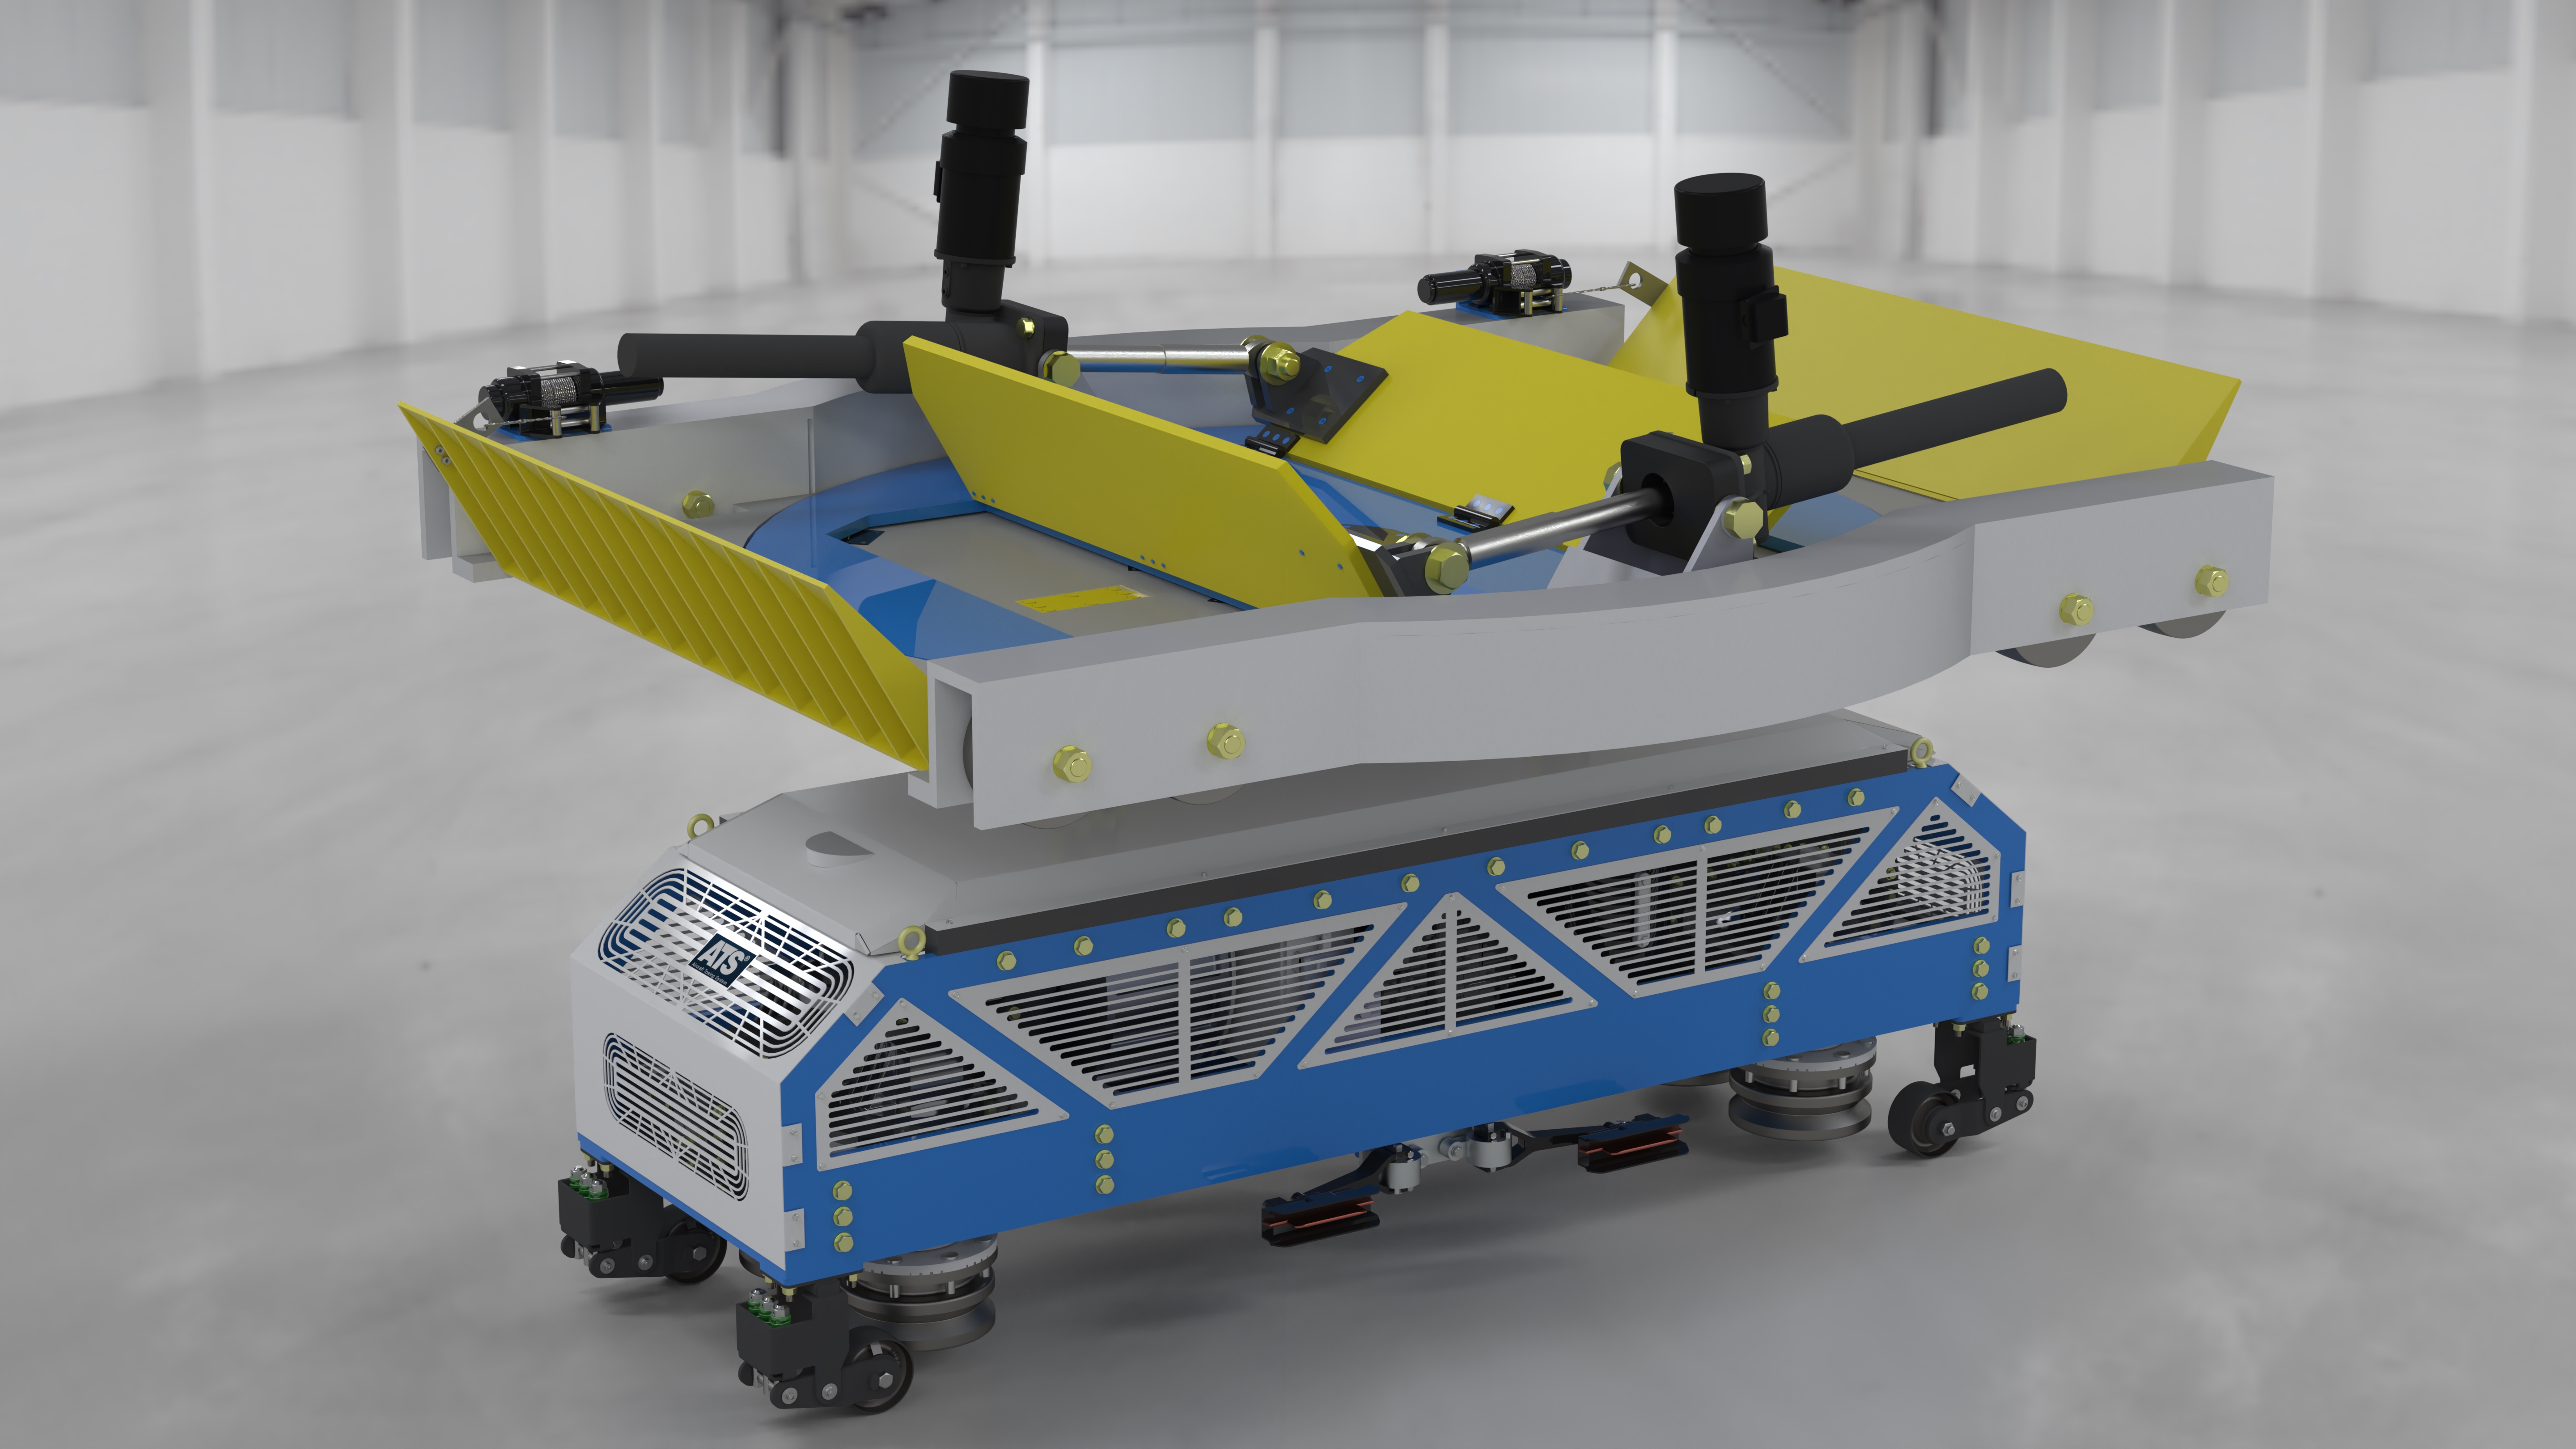 Media Release: Aircraft Towing Systems’ Prototype Testing Scheduled for Early Spring